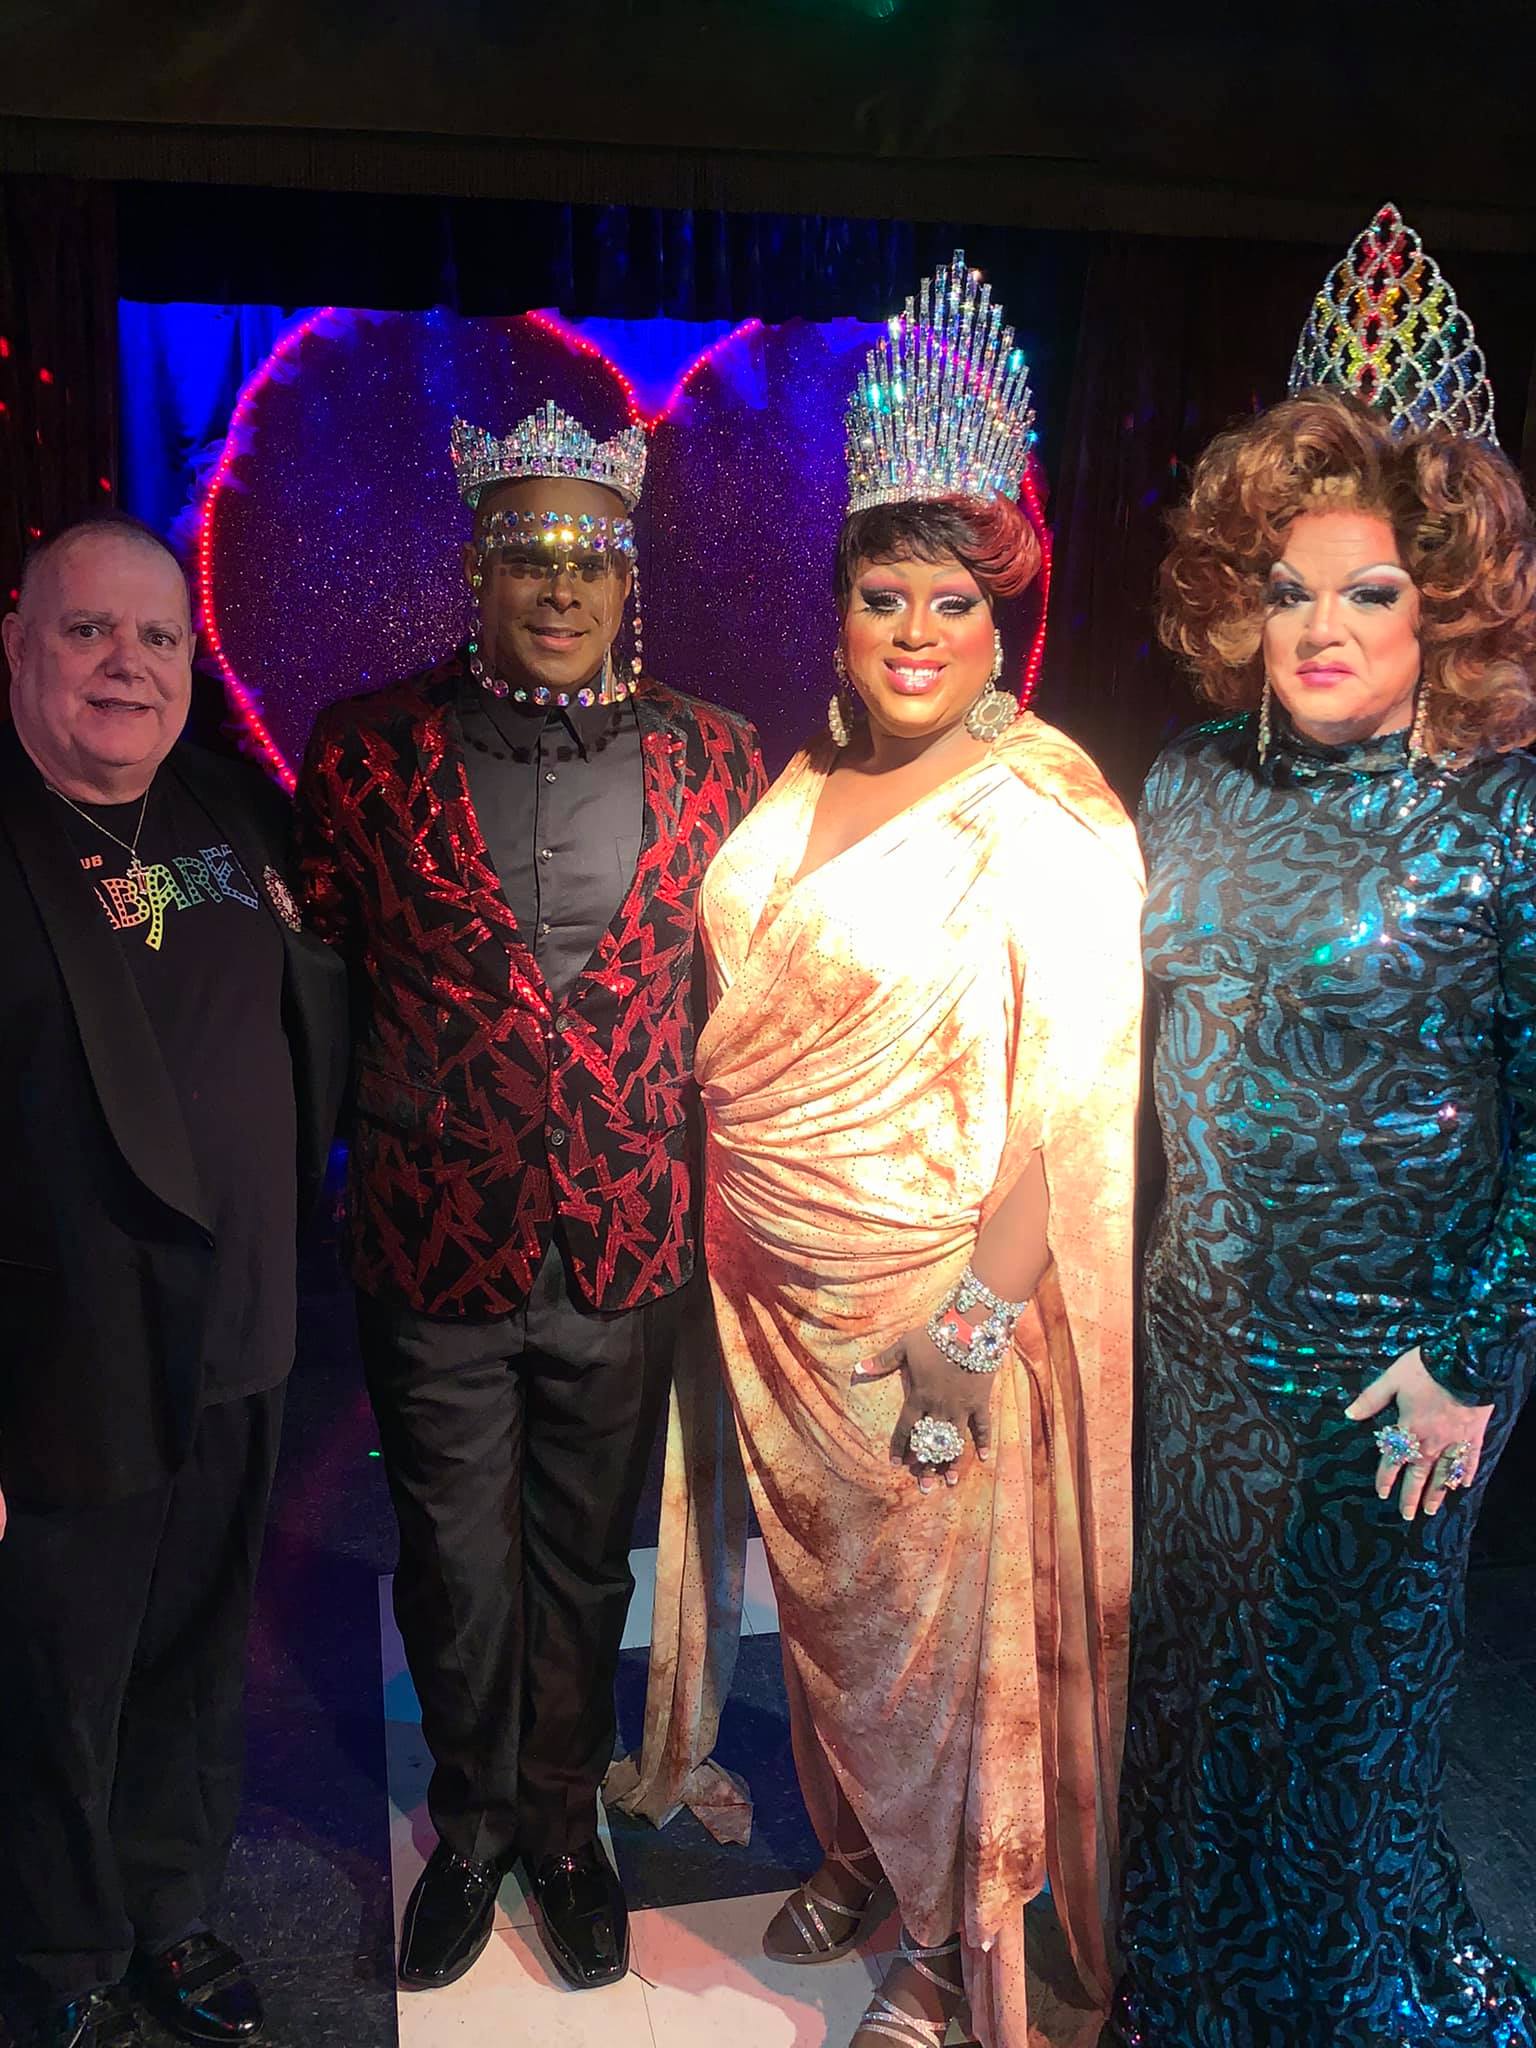 Jeff Reeves, Taylor Knight Addams St. James, Cierra Desire Nichole and Connie Conover | Miss Cabaret Valentine and Mr. Cabaret Valentine | Club Cabaret (Hickory, North Carolina) | 2/14/2021